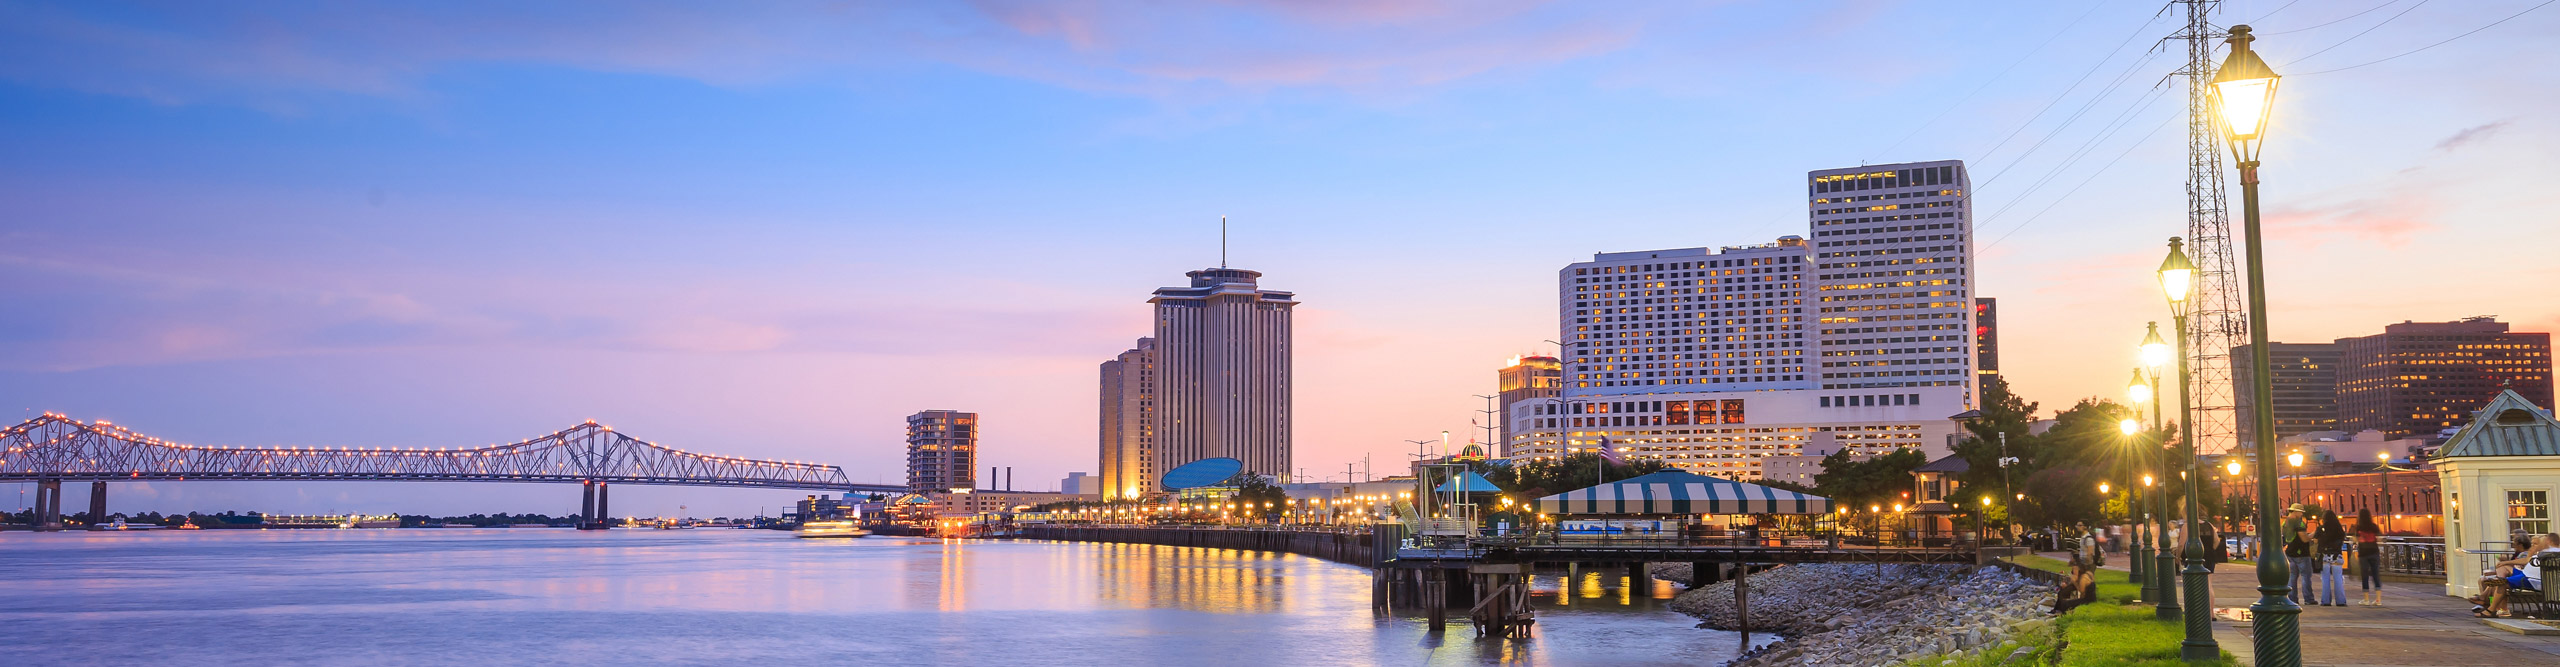 A pink and blue sky at dusk over the skyline of New Orleans, Lousiana, USA